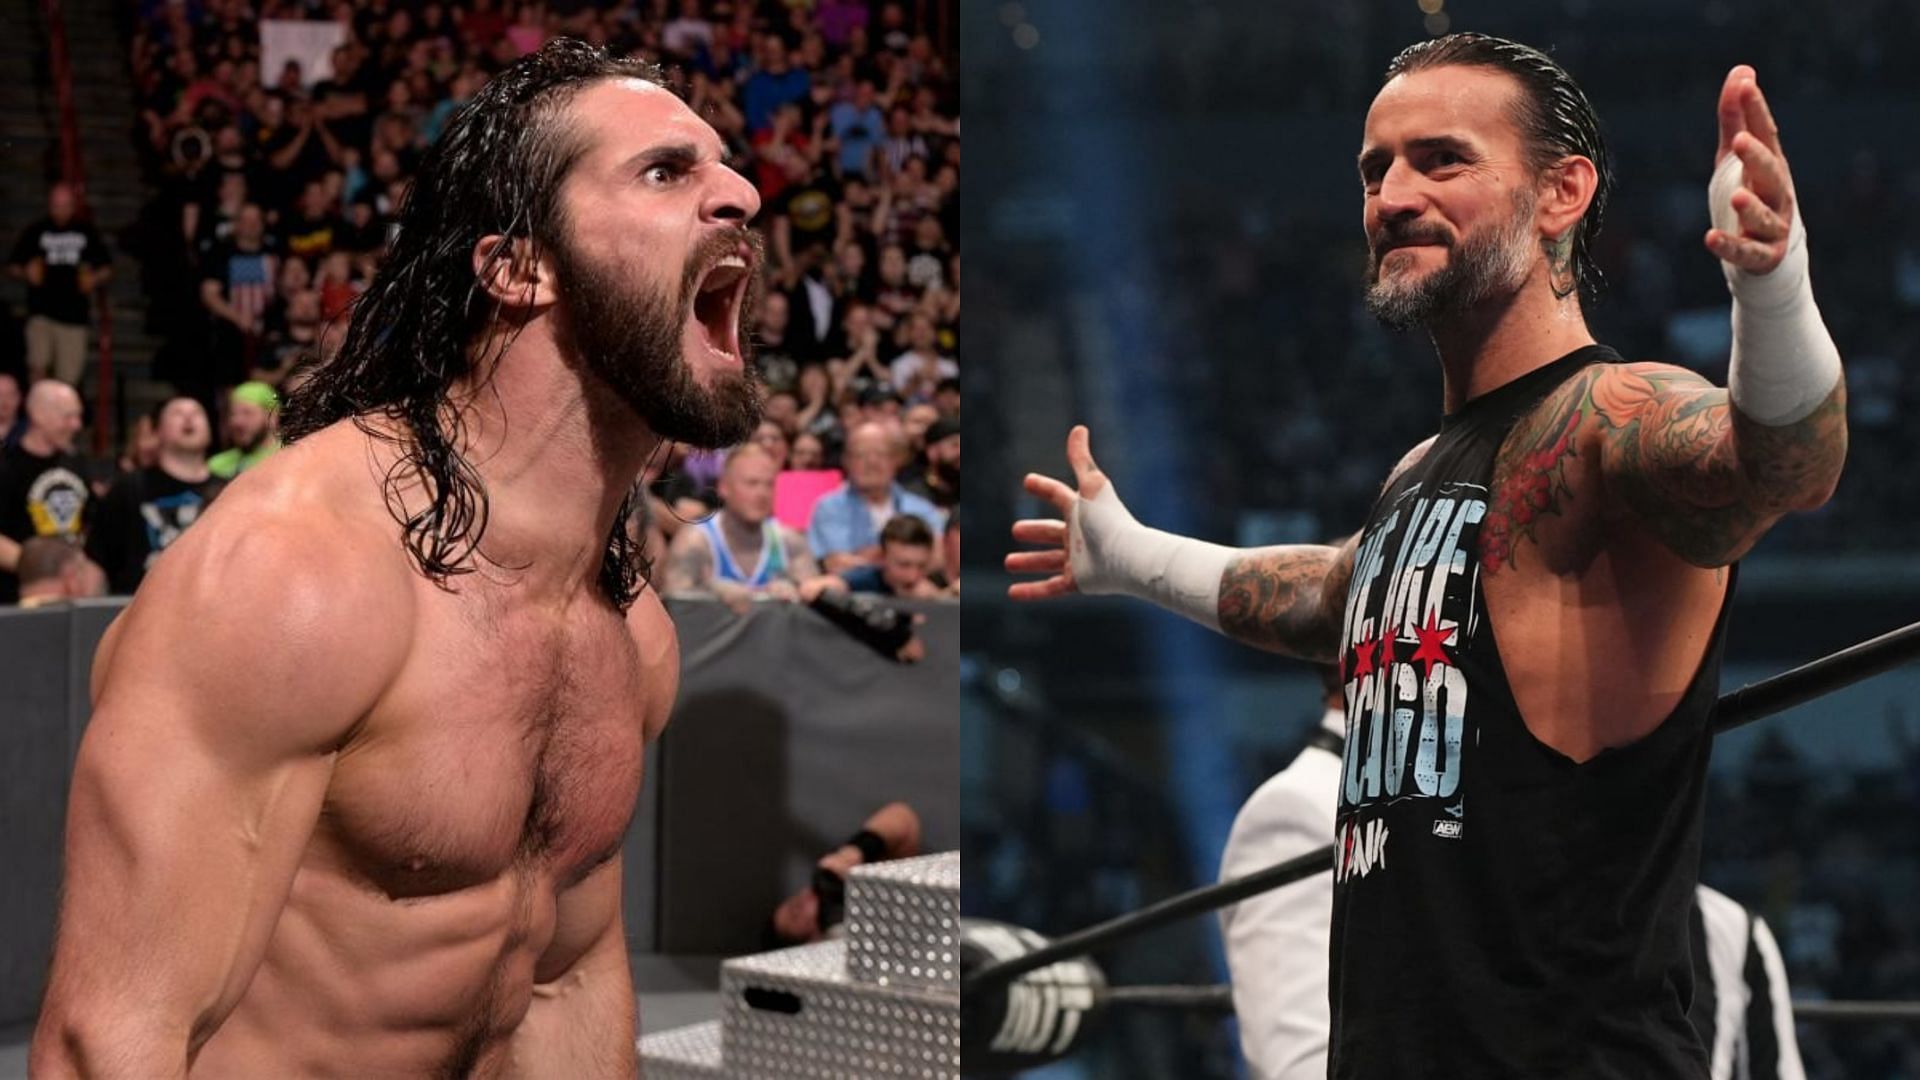 Would WWE bury these stars to elevate CM Punk if he jumps over?